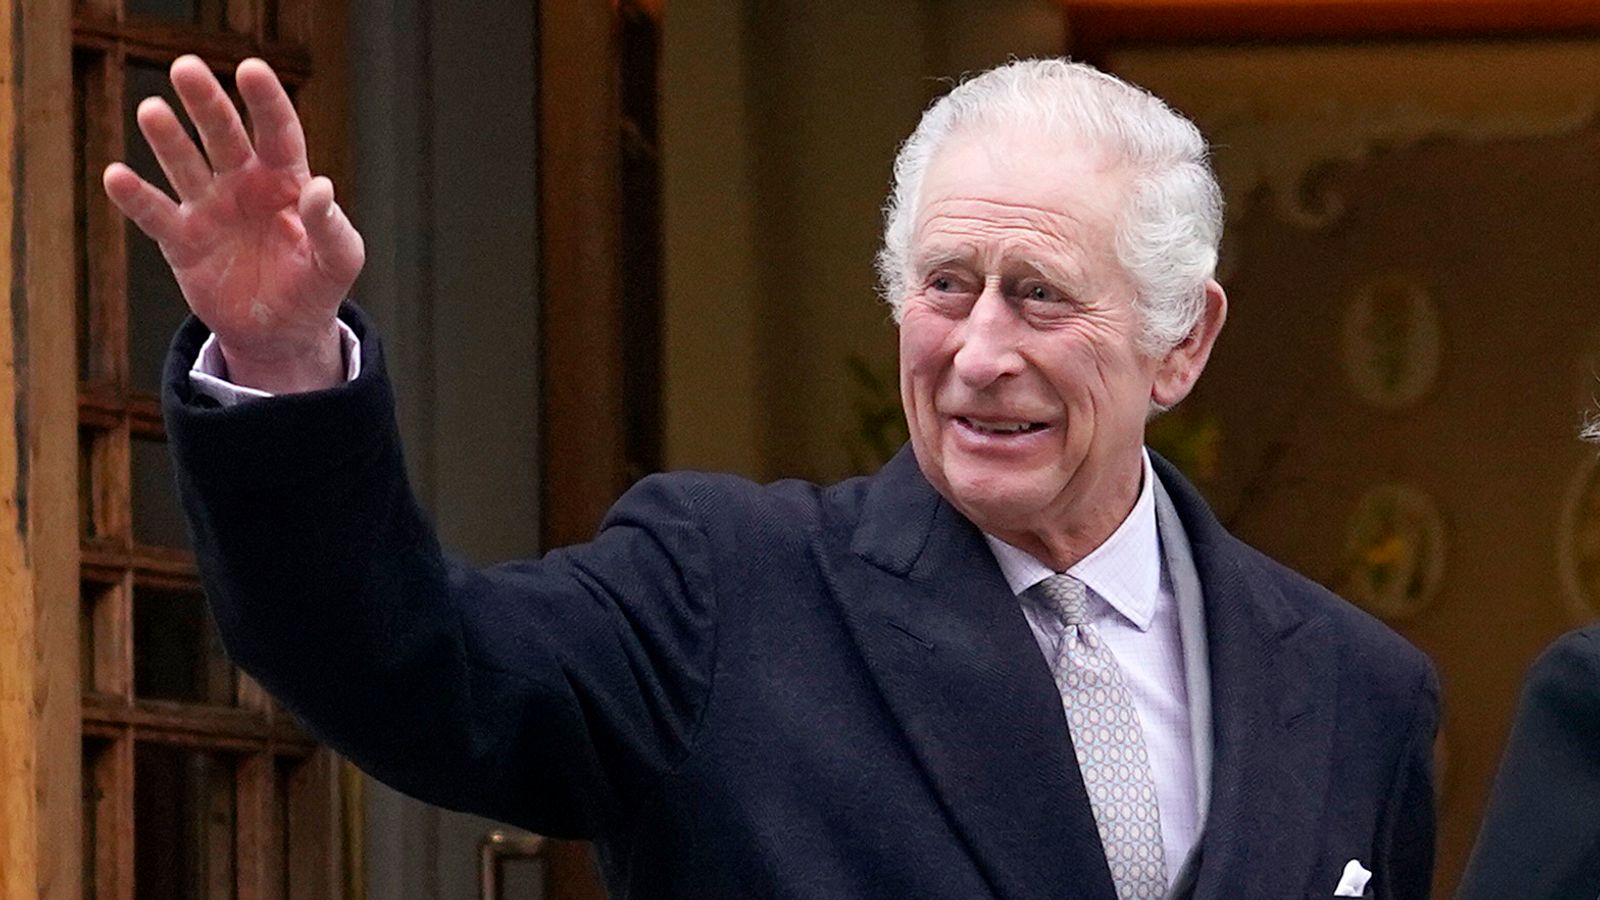 King Charles's upcoming return marks positive moment after difficult months for Royal Family